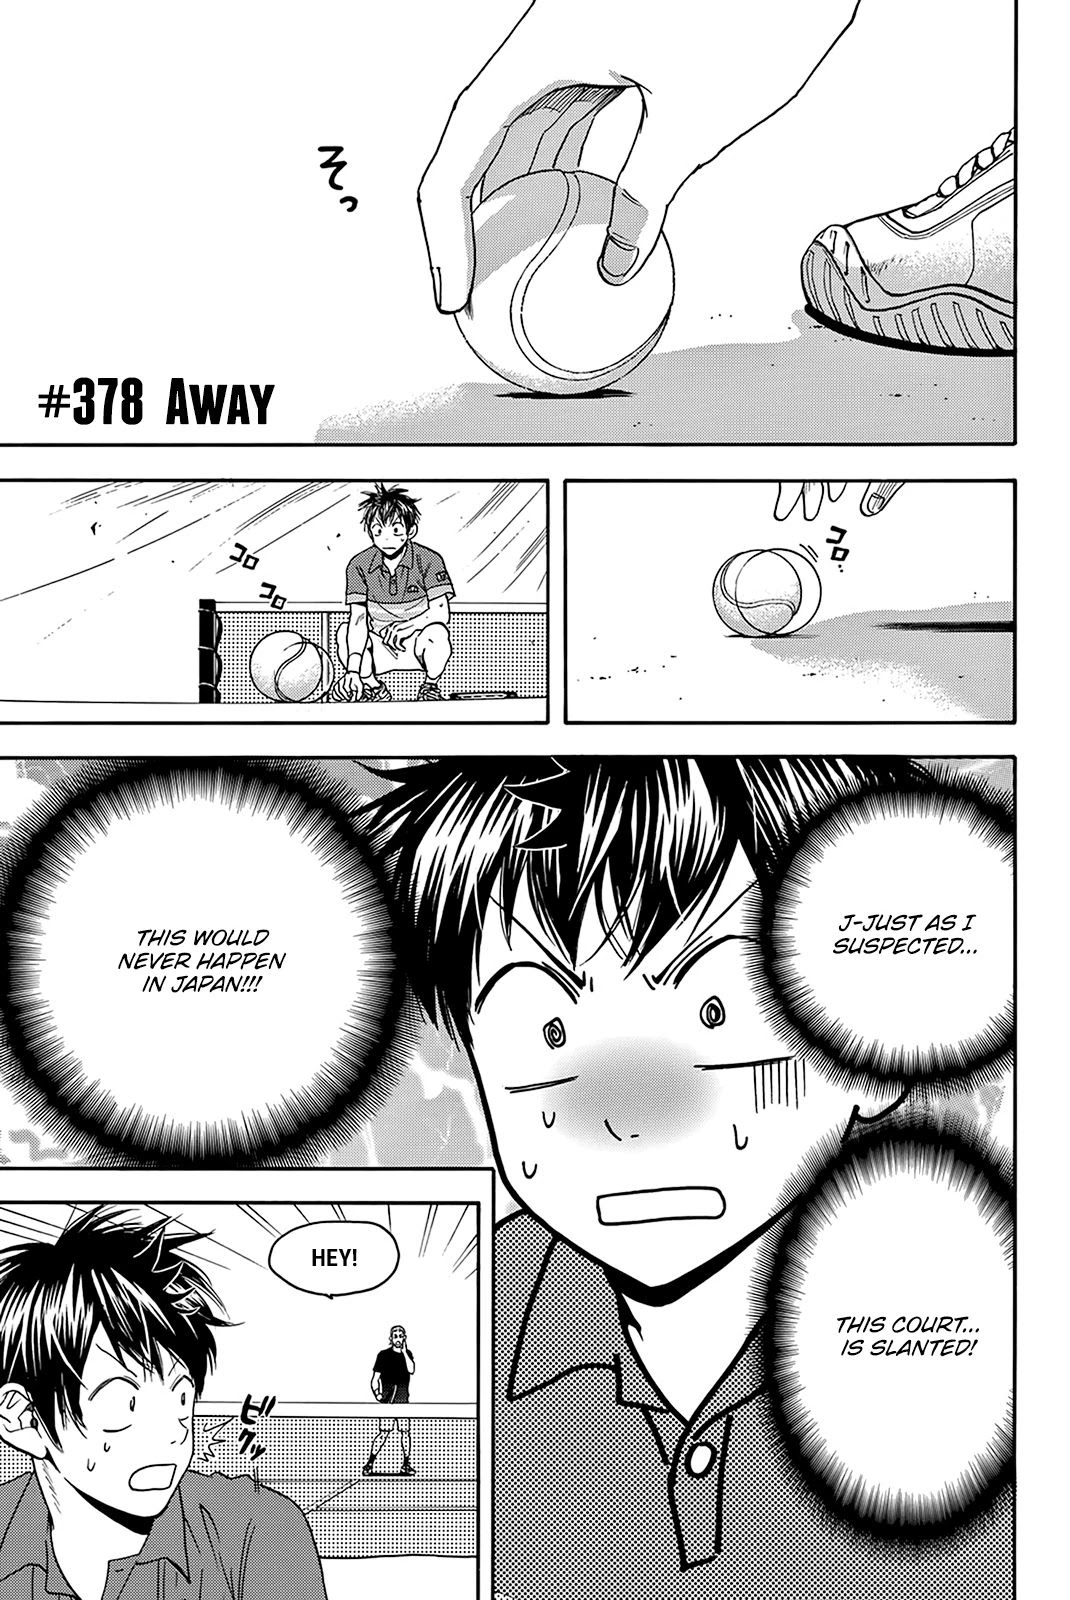 Baby Steps Chapter 378: Away - Picture 2